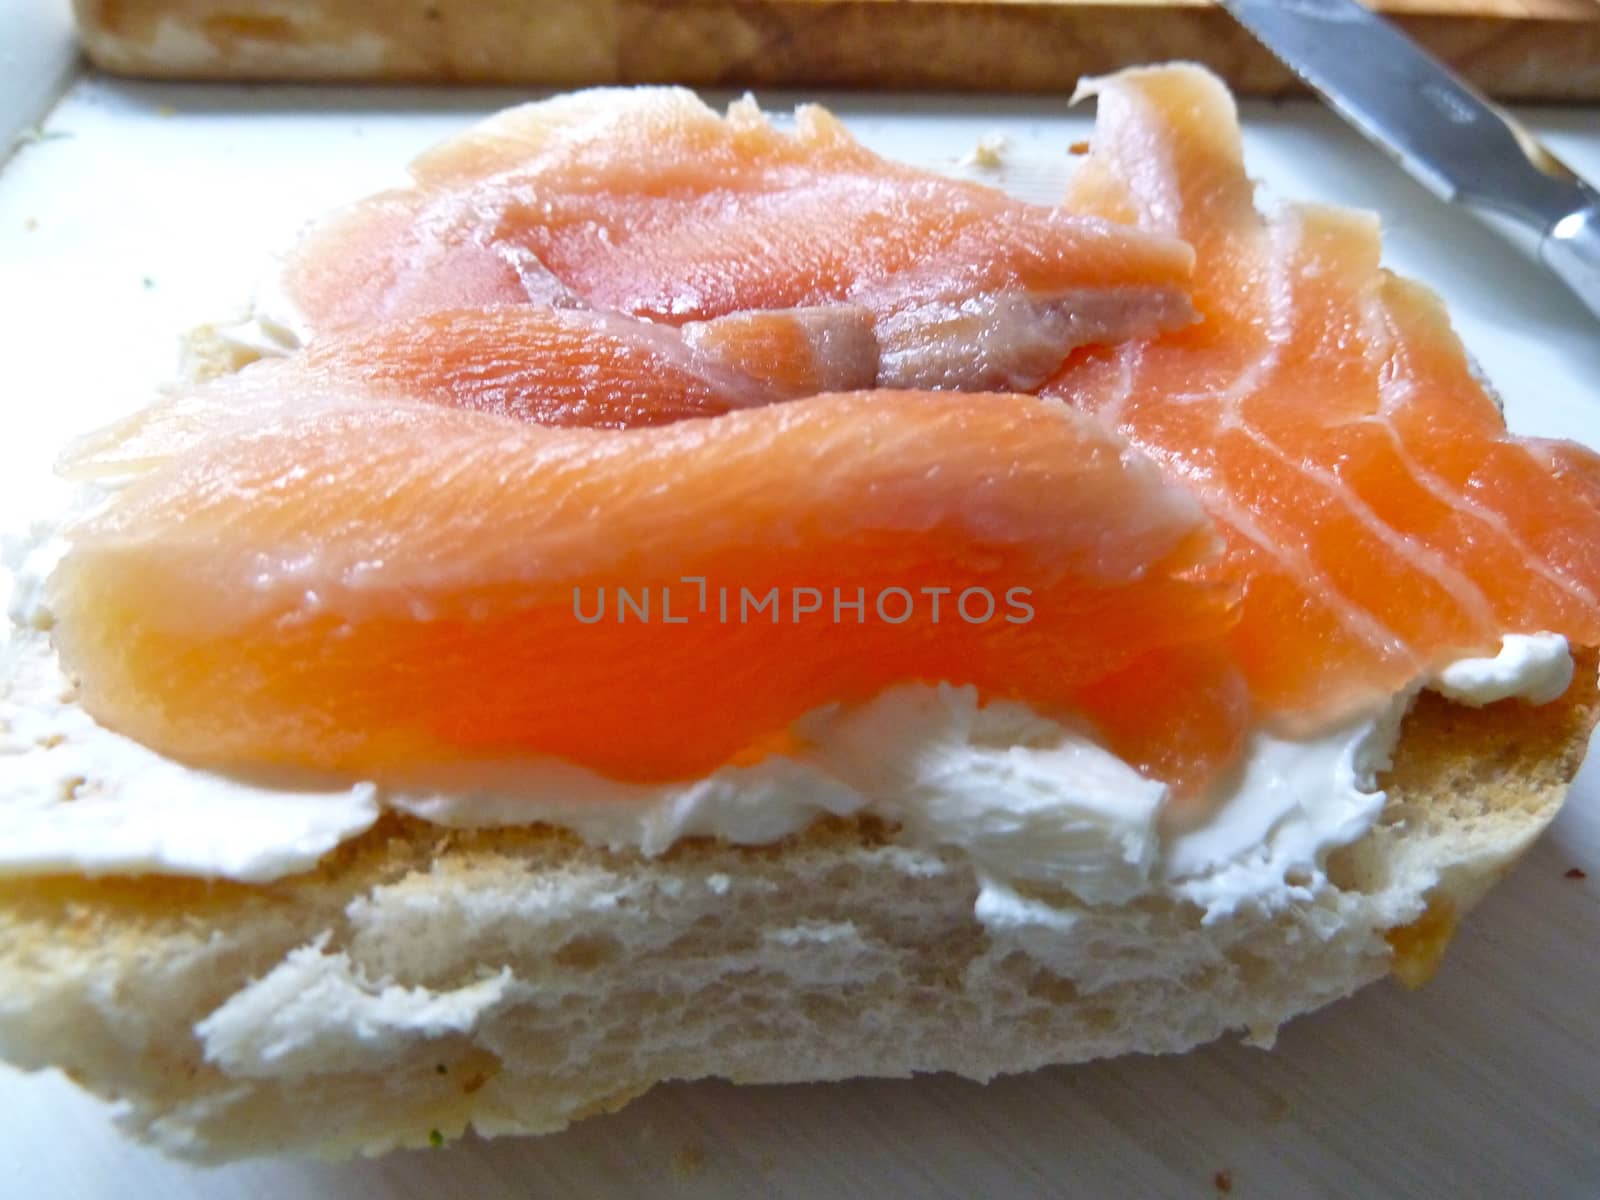 Salmon and cream cheese by gazmoi